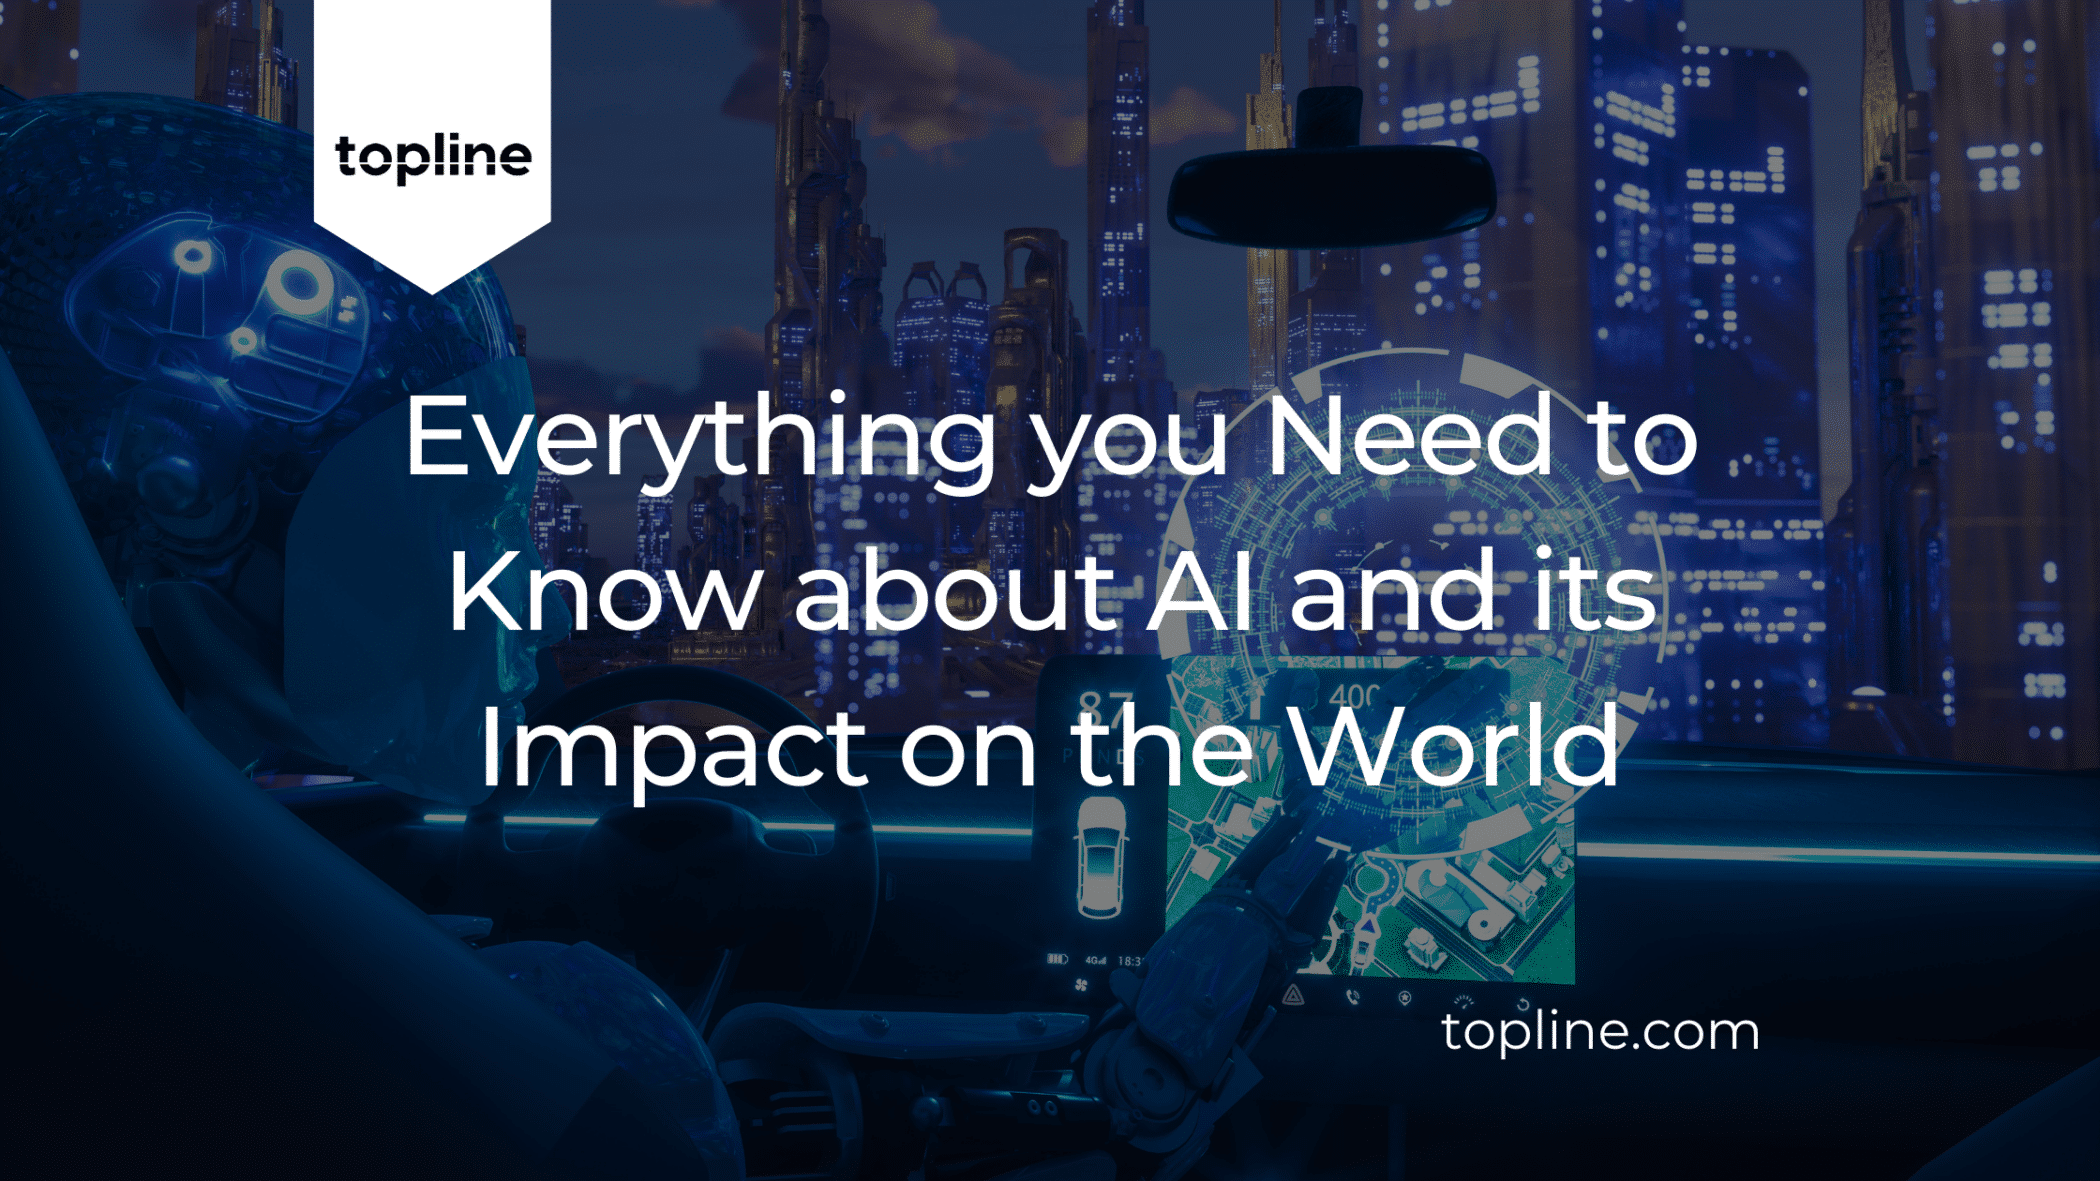 Everything you Need to Know About AI and its Impact on the World